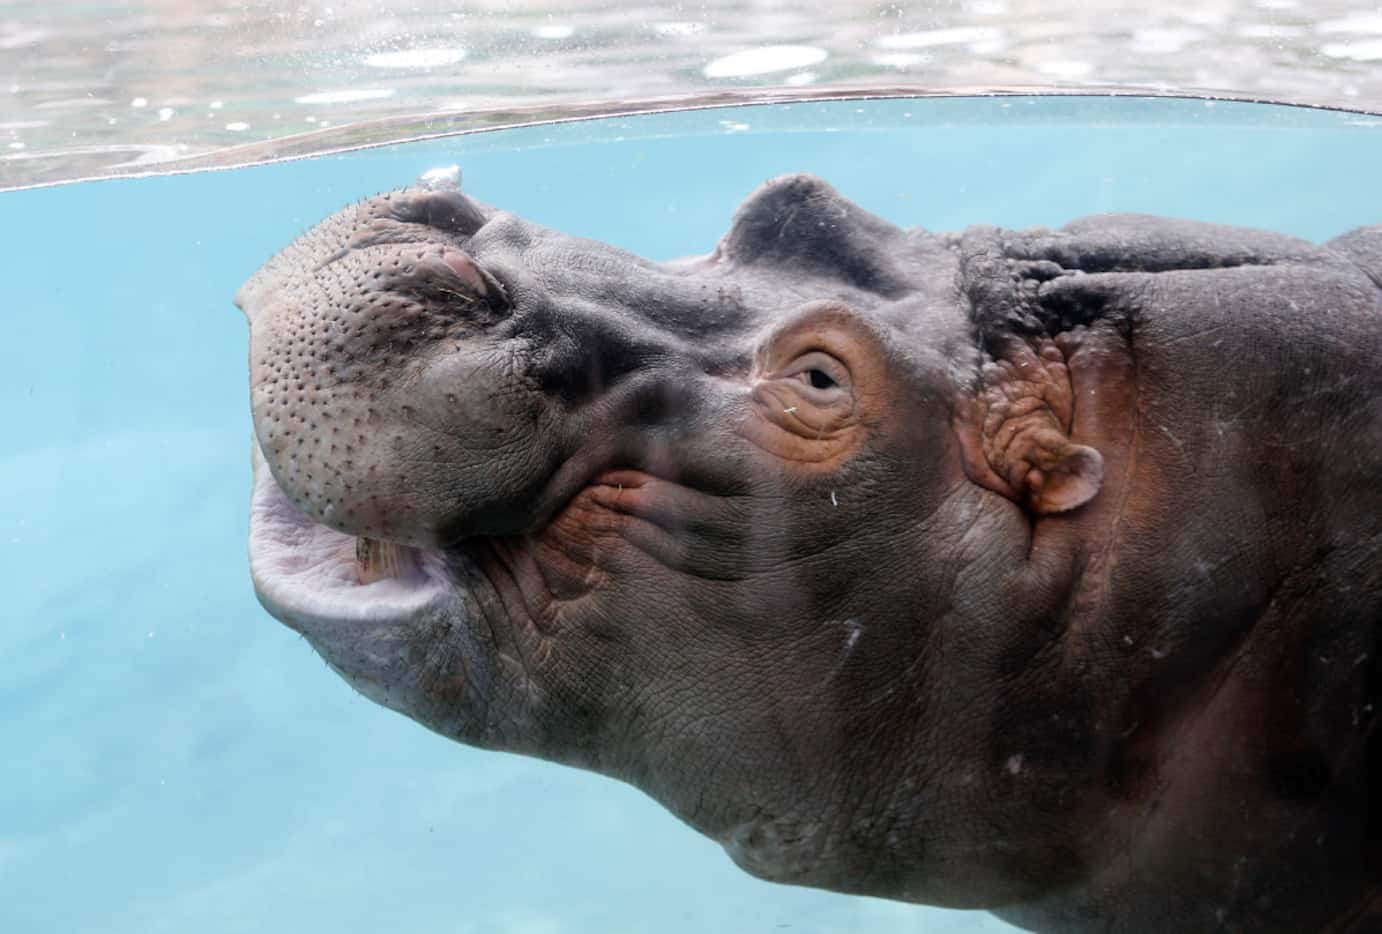 Adhama near the viewing glass during the grand opening of the Dallas Zoo's hippo exhibit in...